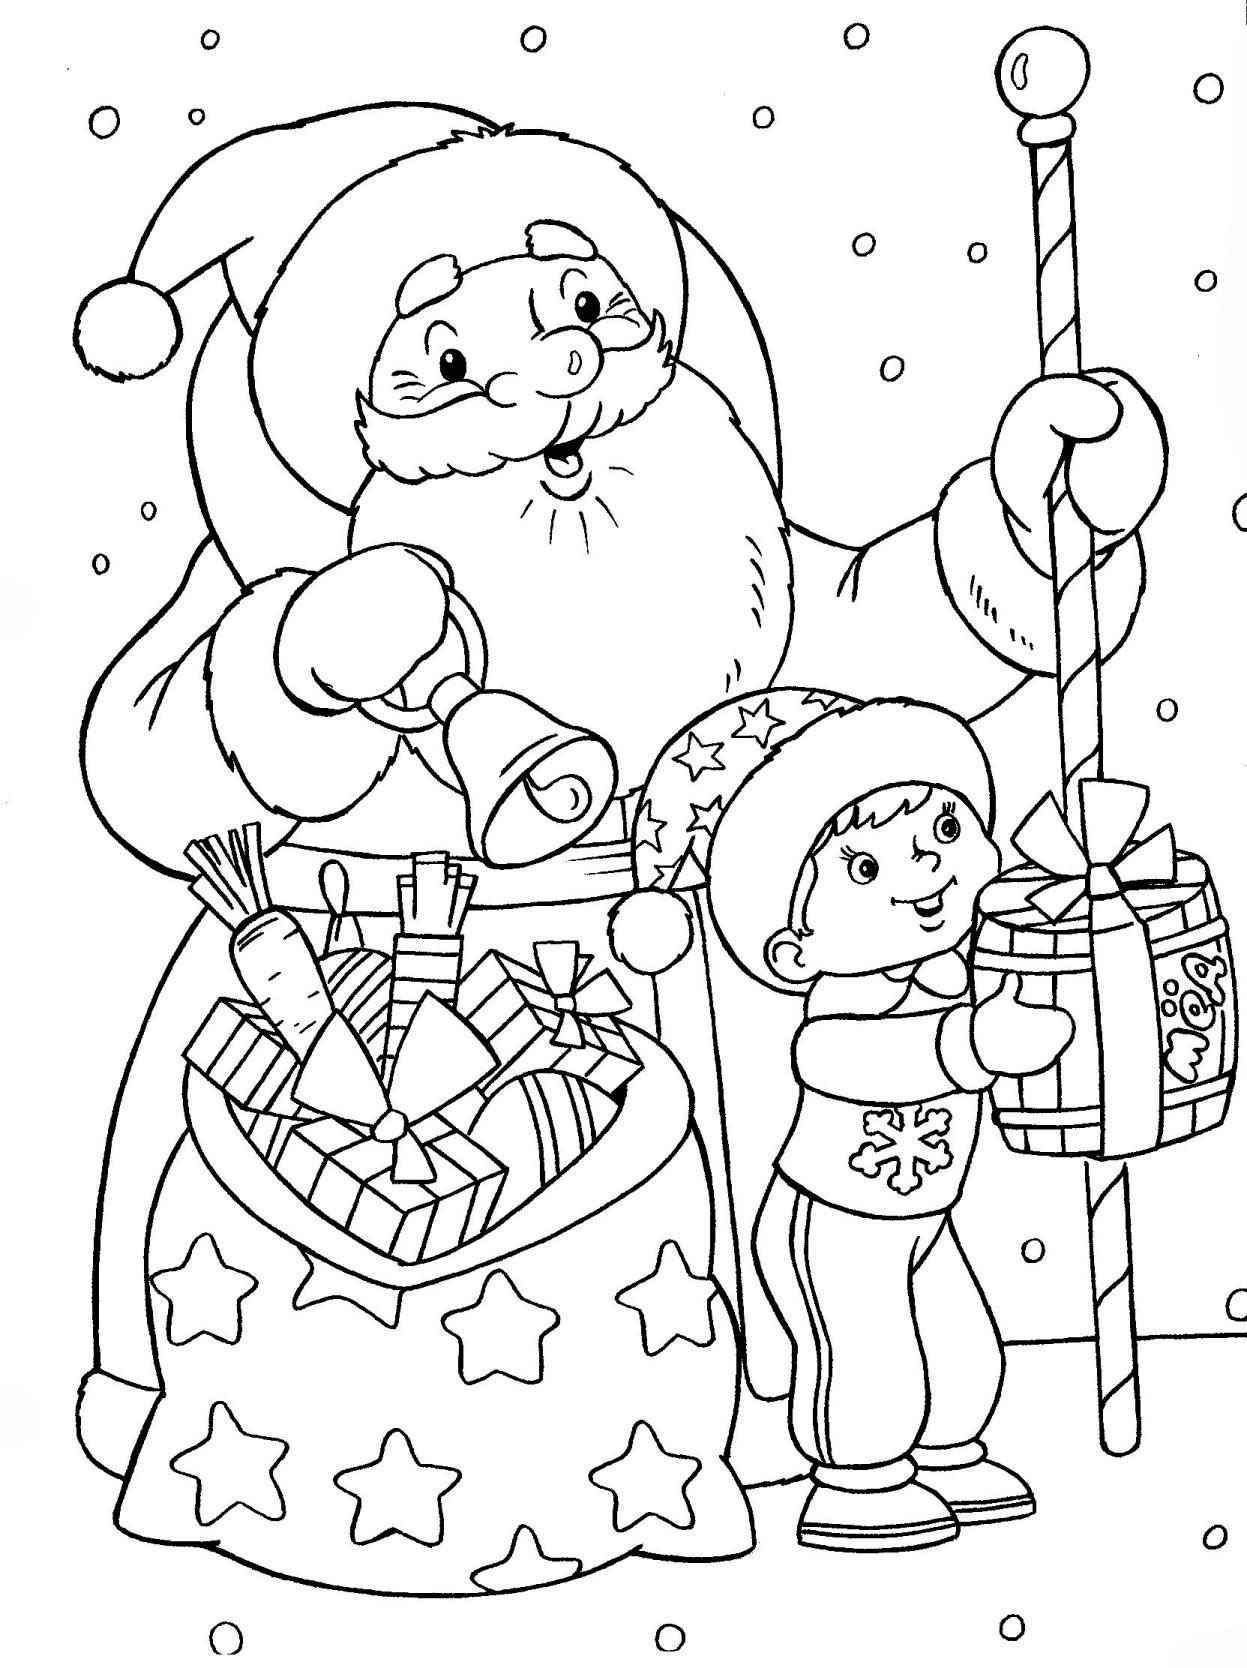 Santa Claus and Snow Maiden drawing #8